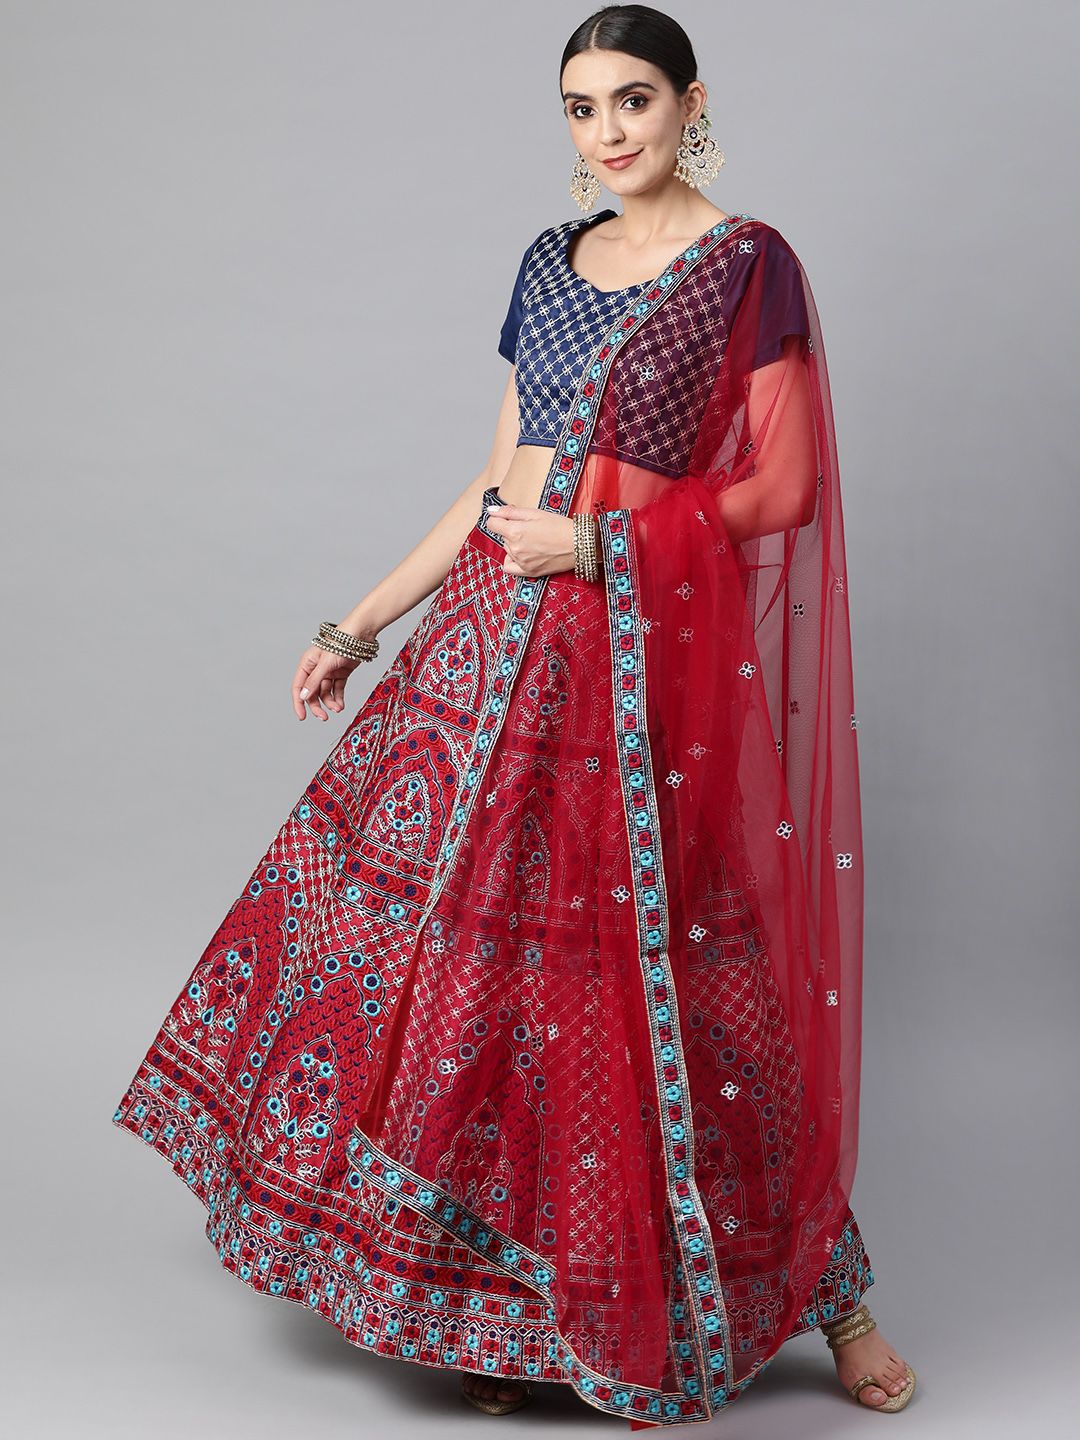 Readiprint Fashions Maroon & Blue Embroidered Zardozi Unstitched Lehenga & Blouse With Dupatta Price in India